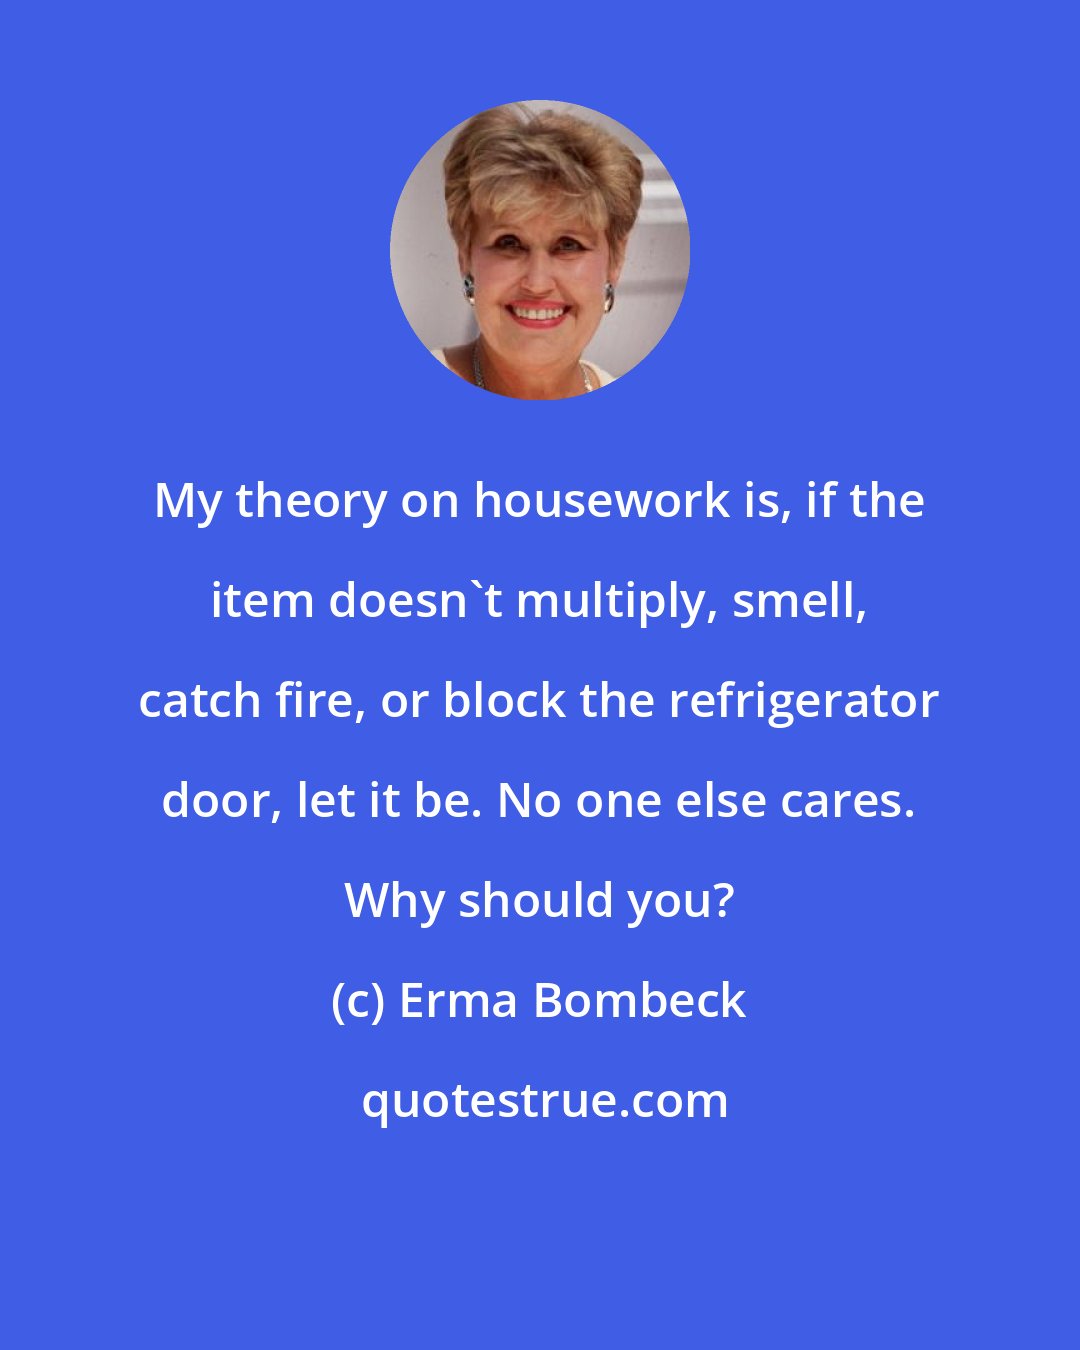 Erma Bombeck: My theory on housework is, if the item doesn't multiply, smell, catch fire, or block the refrigerator door, let it be. No one else cares. Why should you?